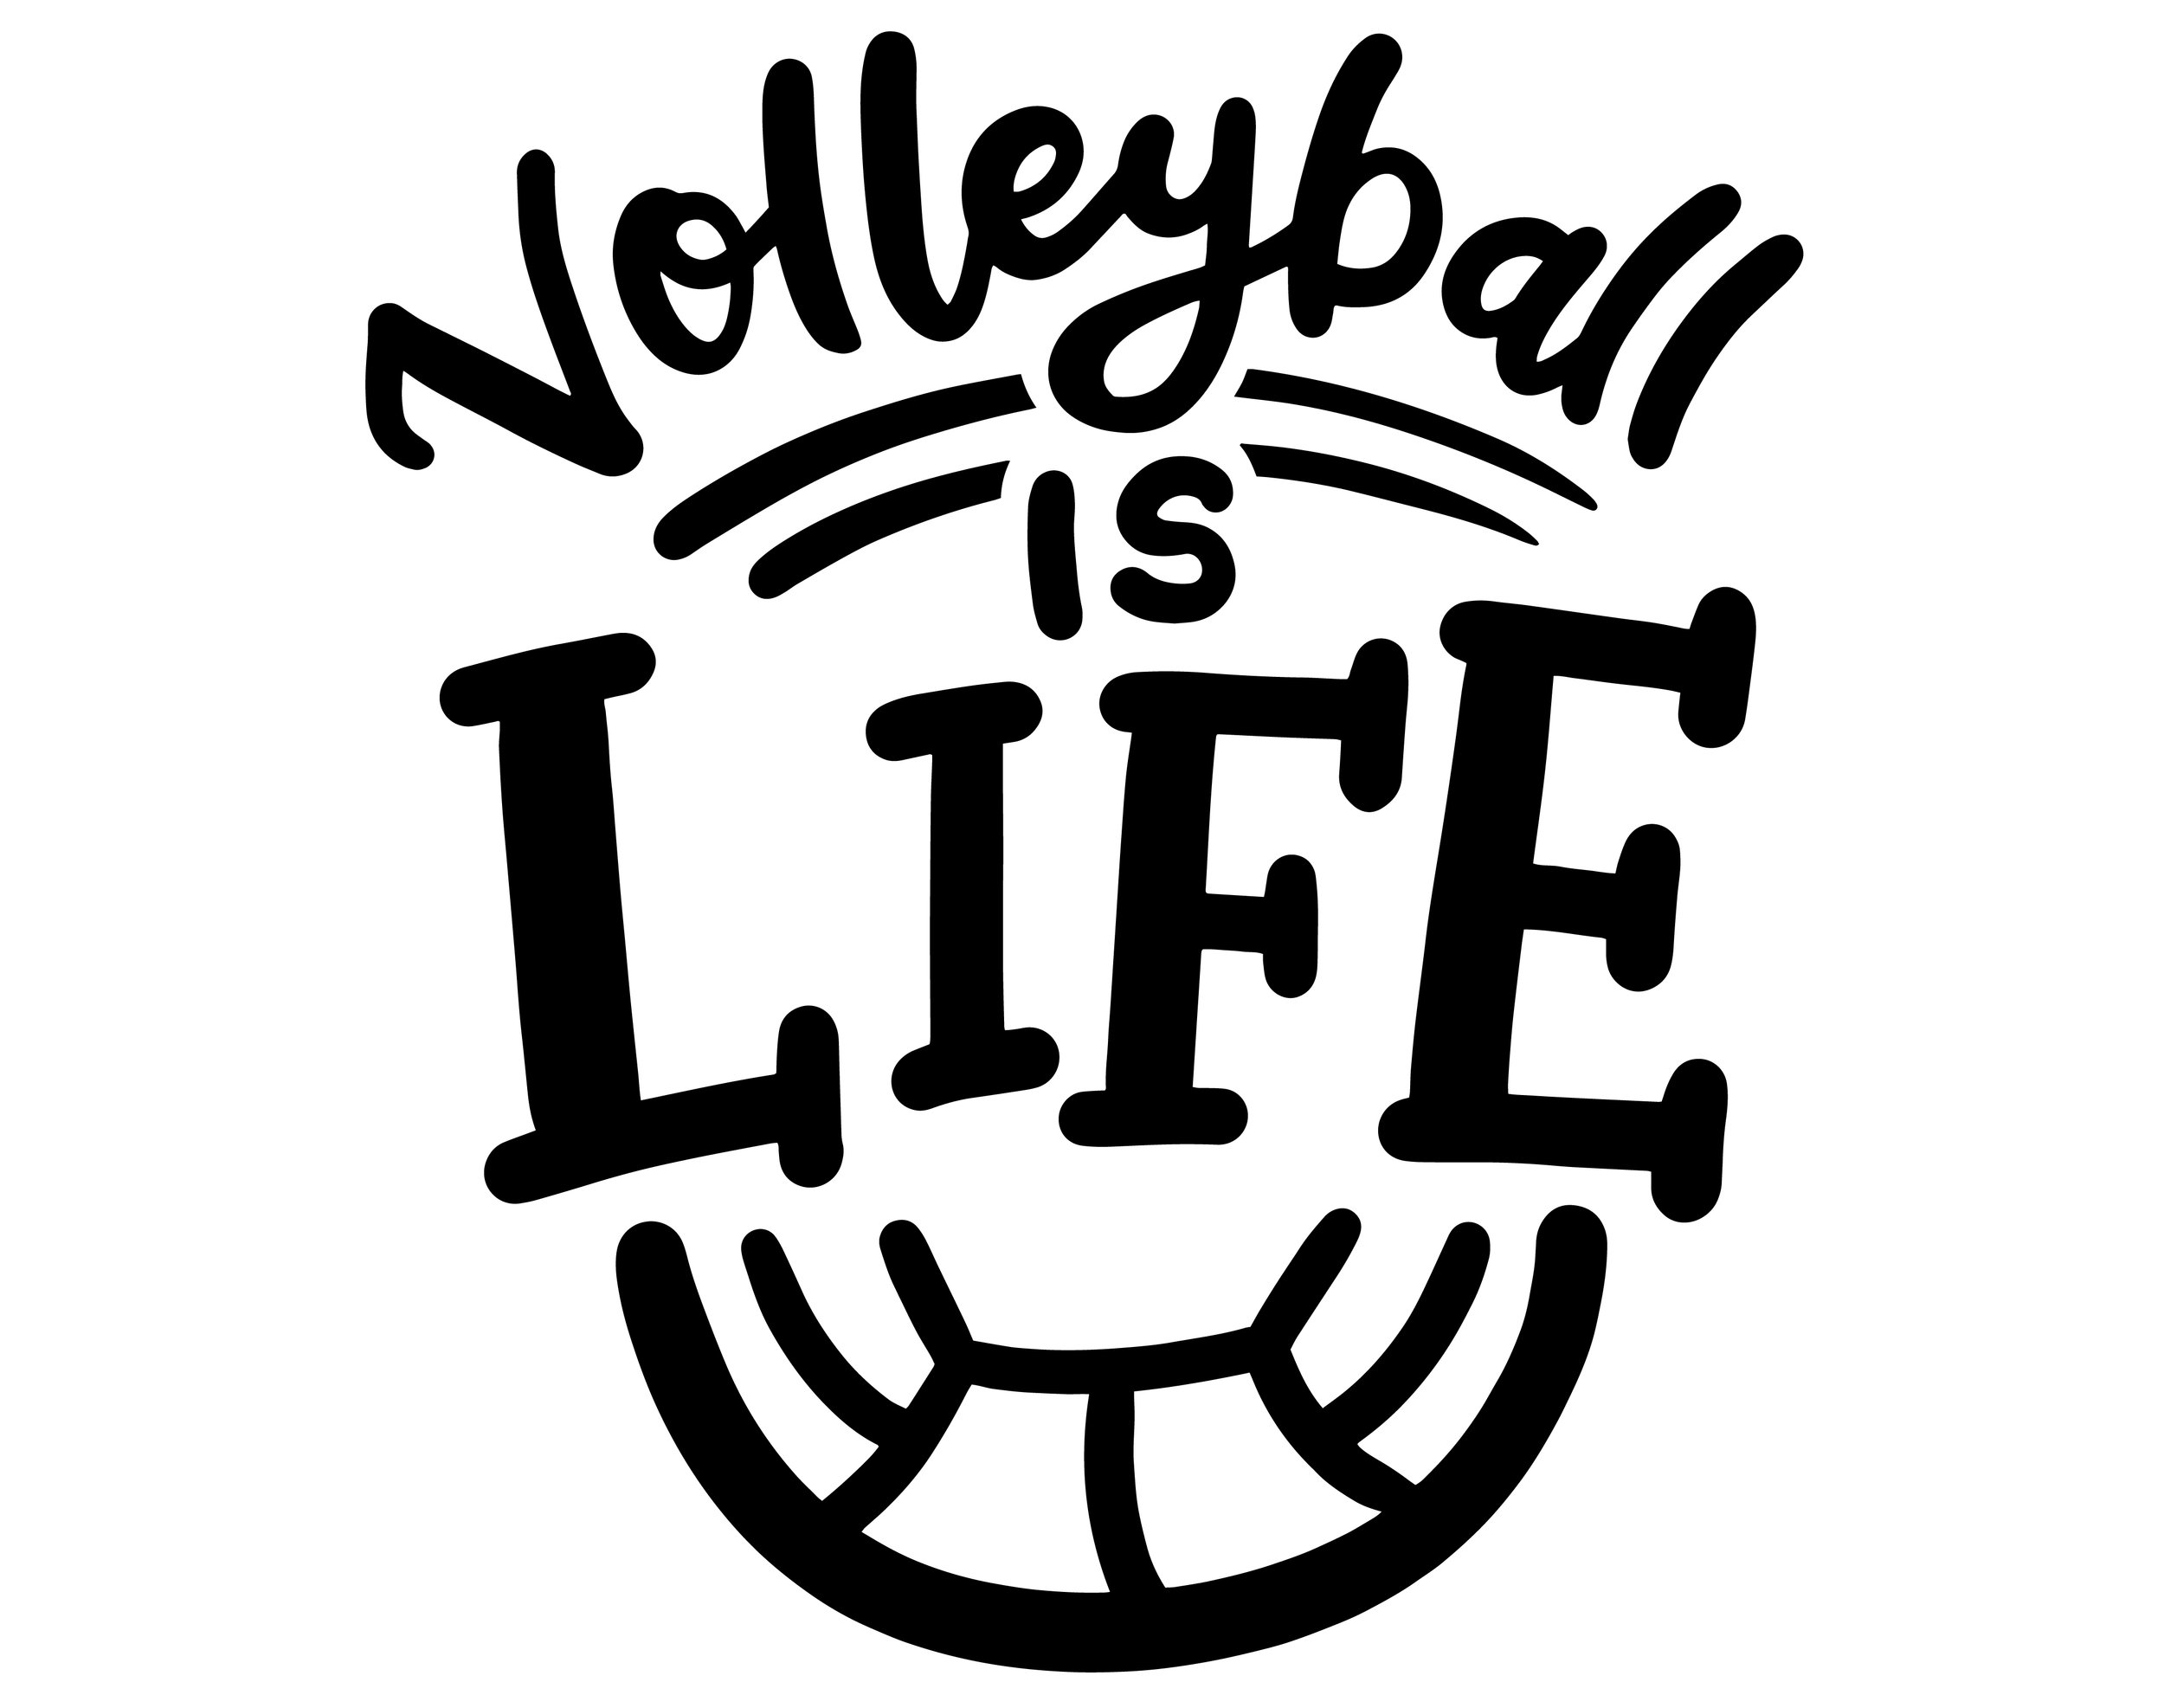 volleyball is life